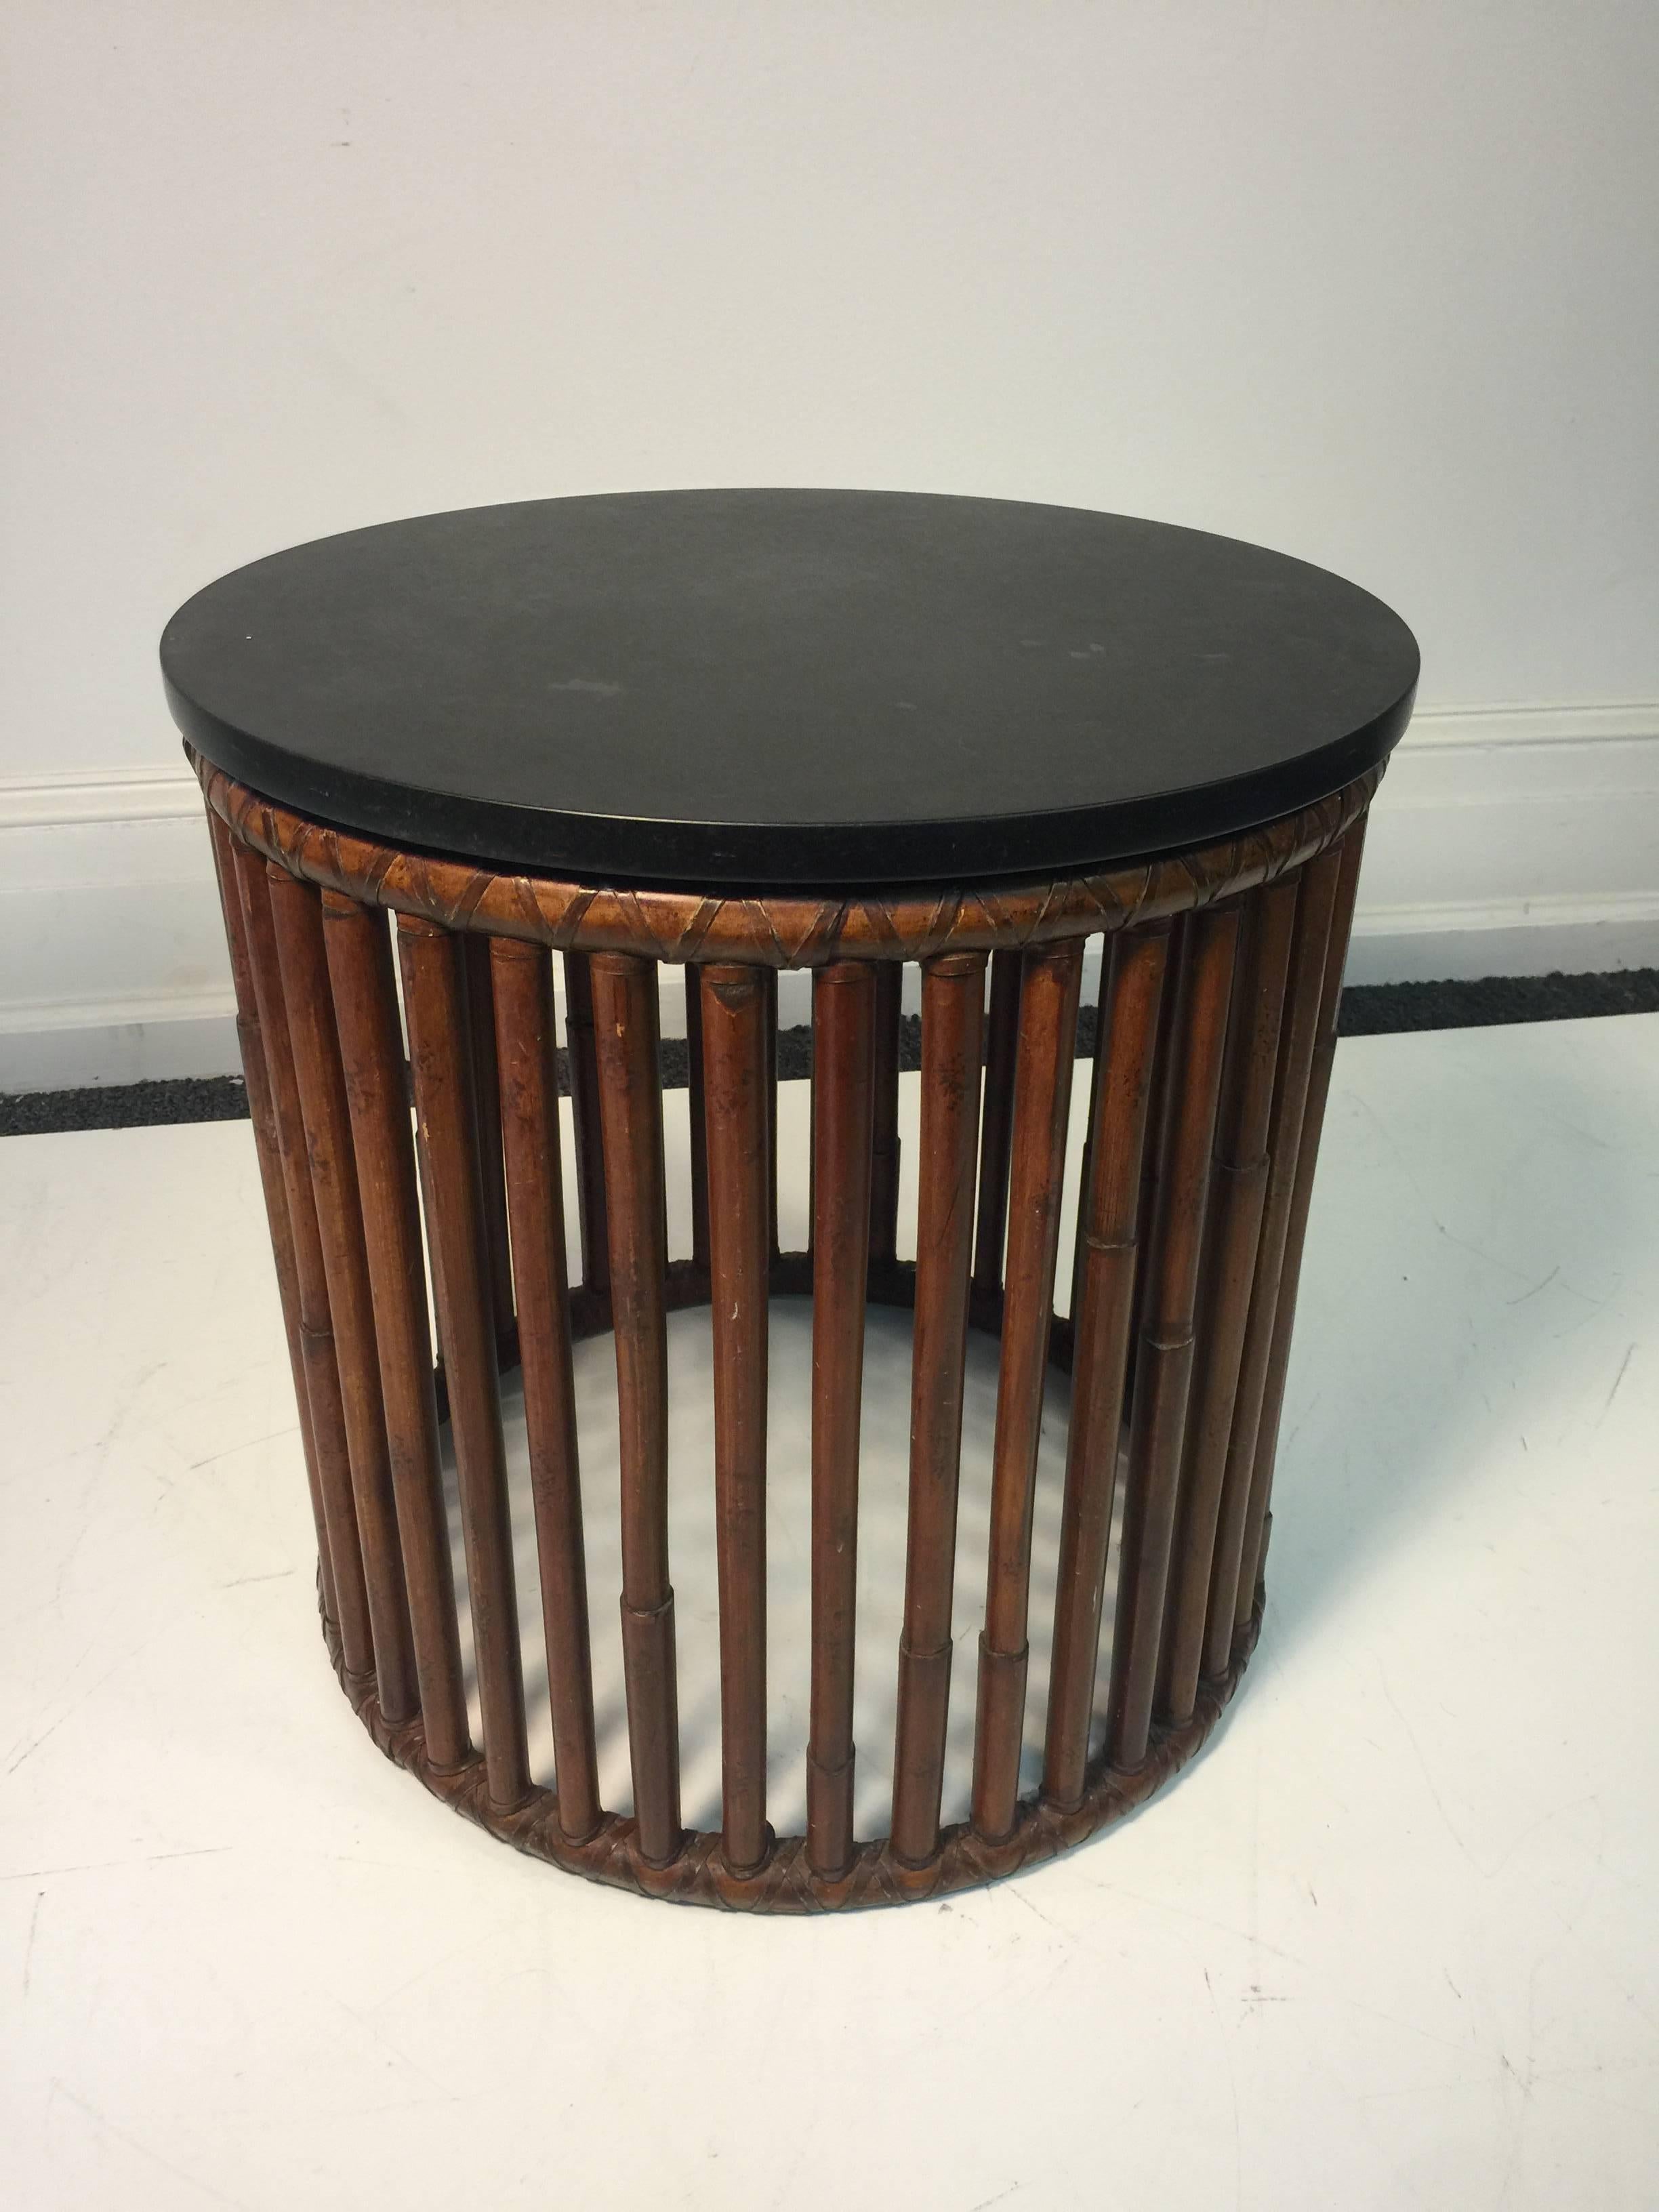 A beautiful bamboo drum table with granite top by McGuire, circa 1980. Good condition with age appropriate wear.